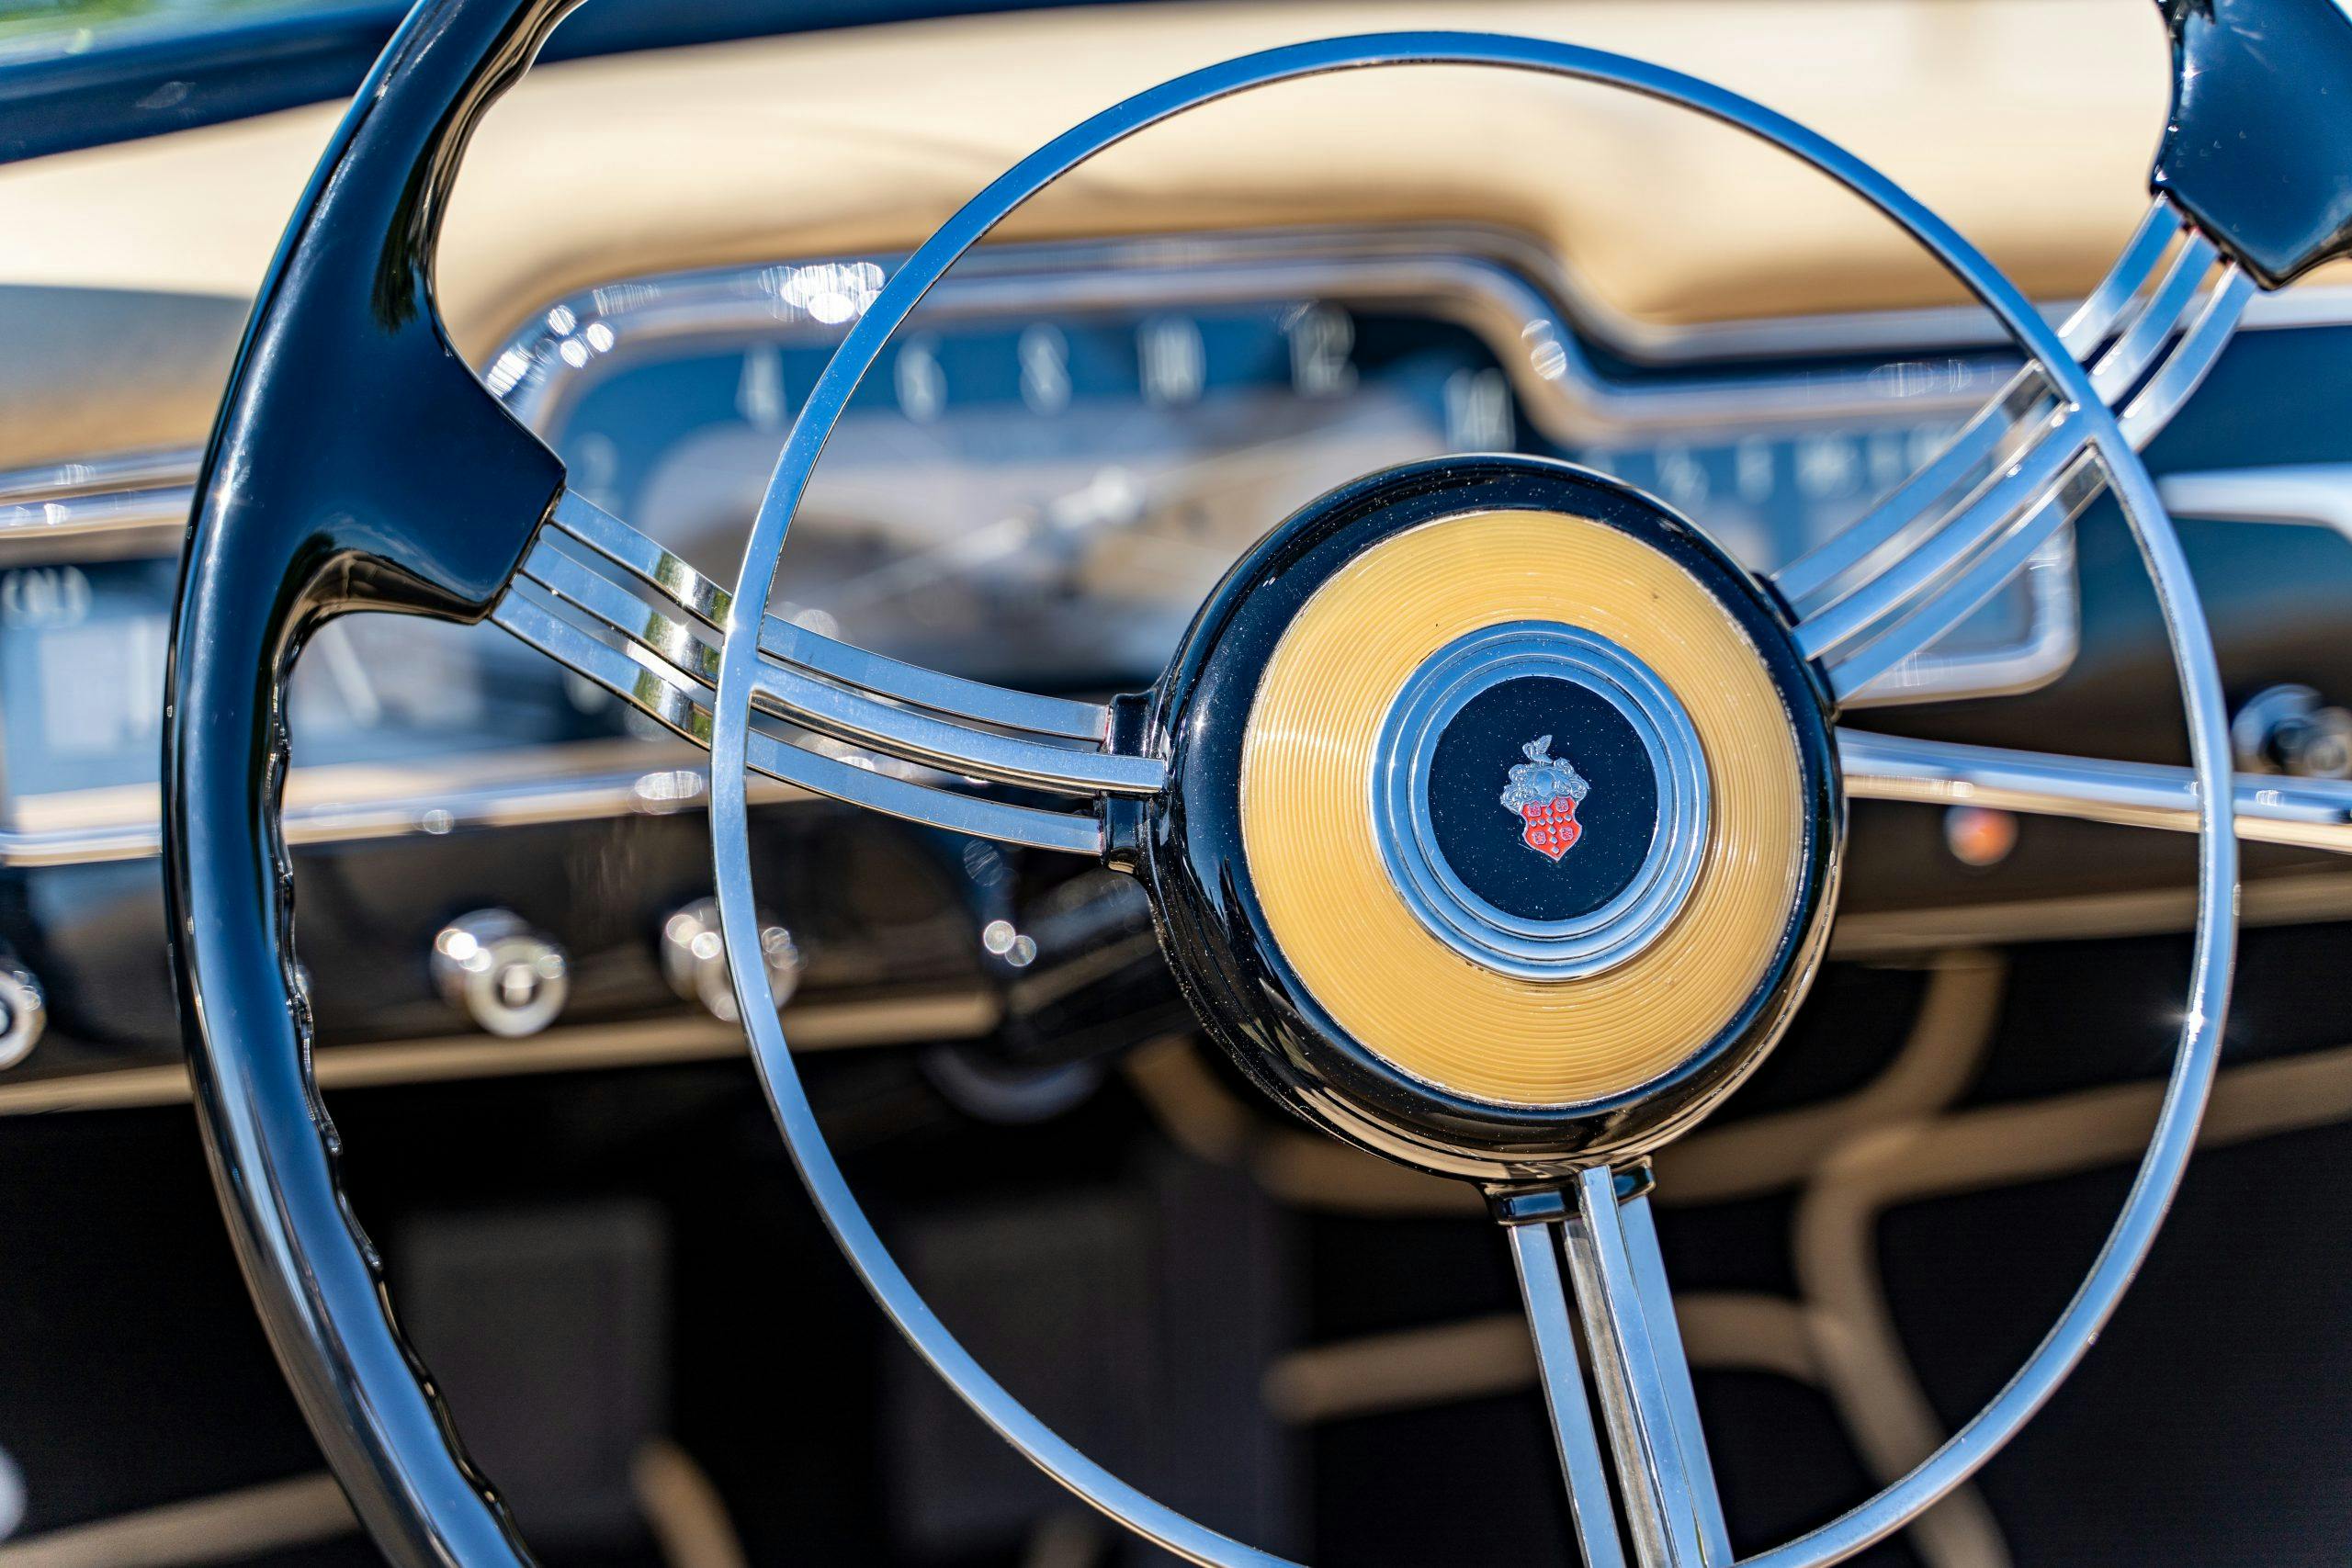 1948 Packard Victoria Convertible Eight by Vignale - 2022 Greenwich Best of Show - Steering wheel